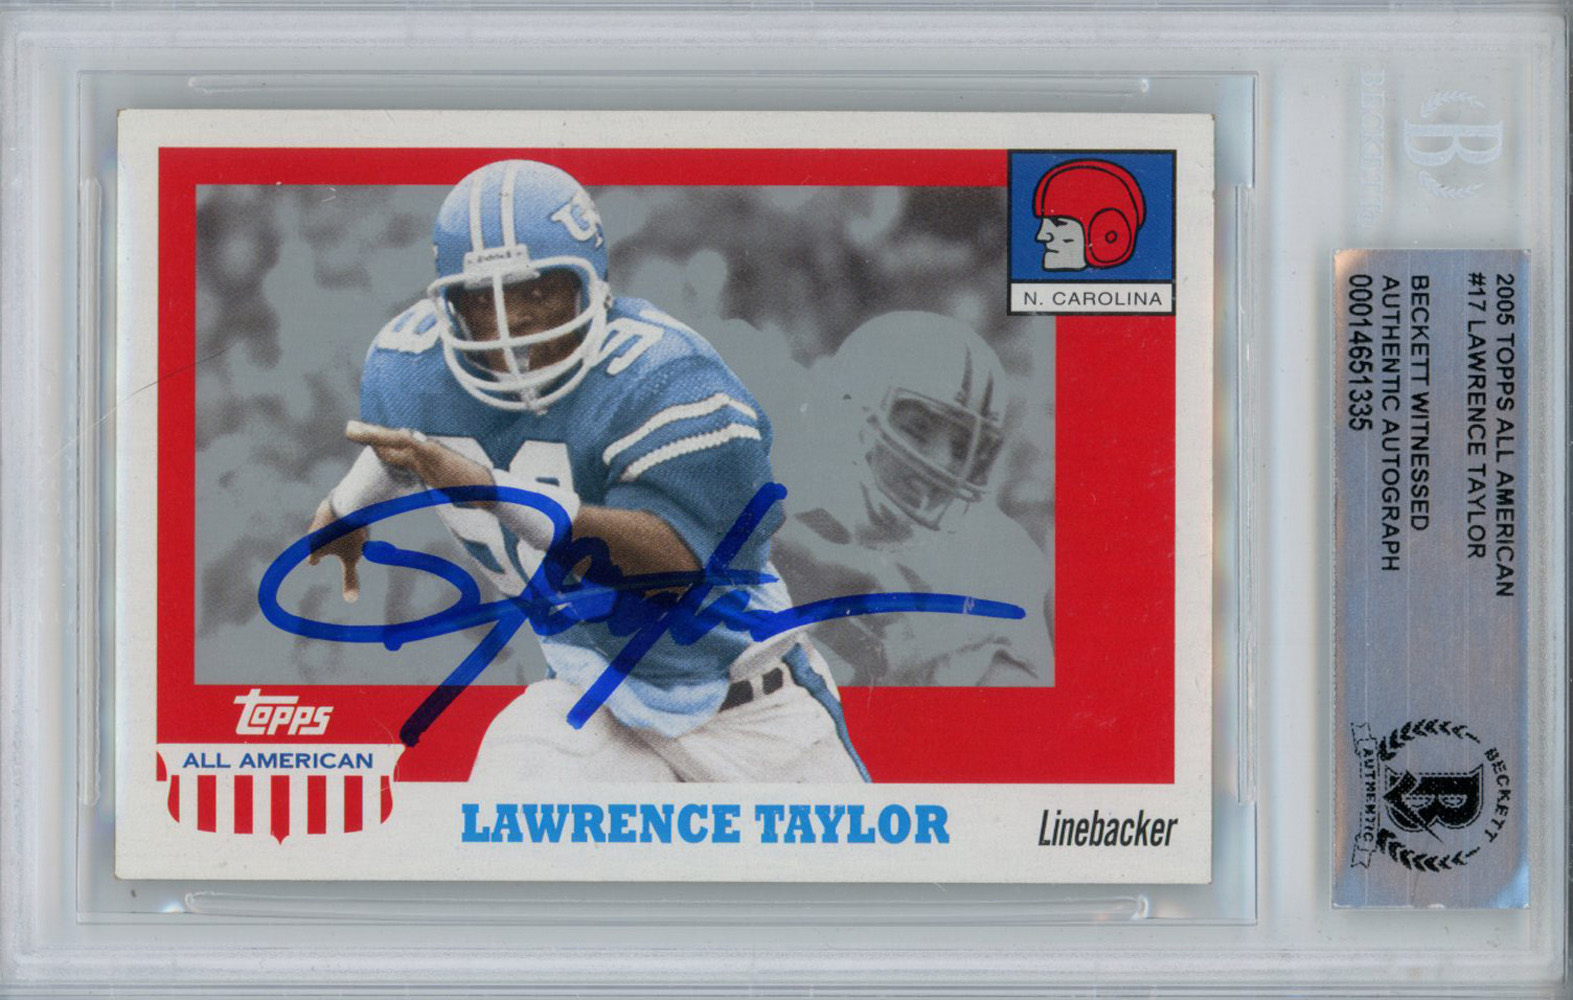 Lawrence Taylor Signed 2005 Topps All American #17 Trading Card BAS Slab